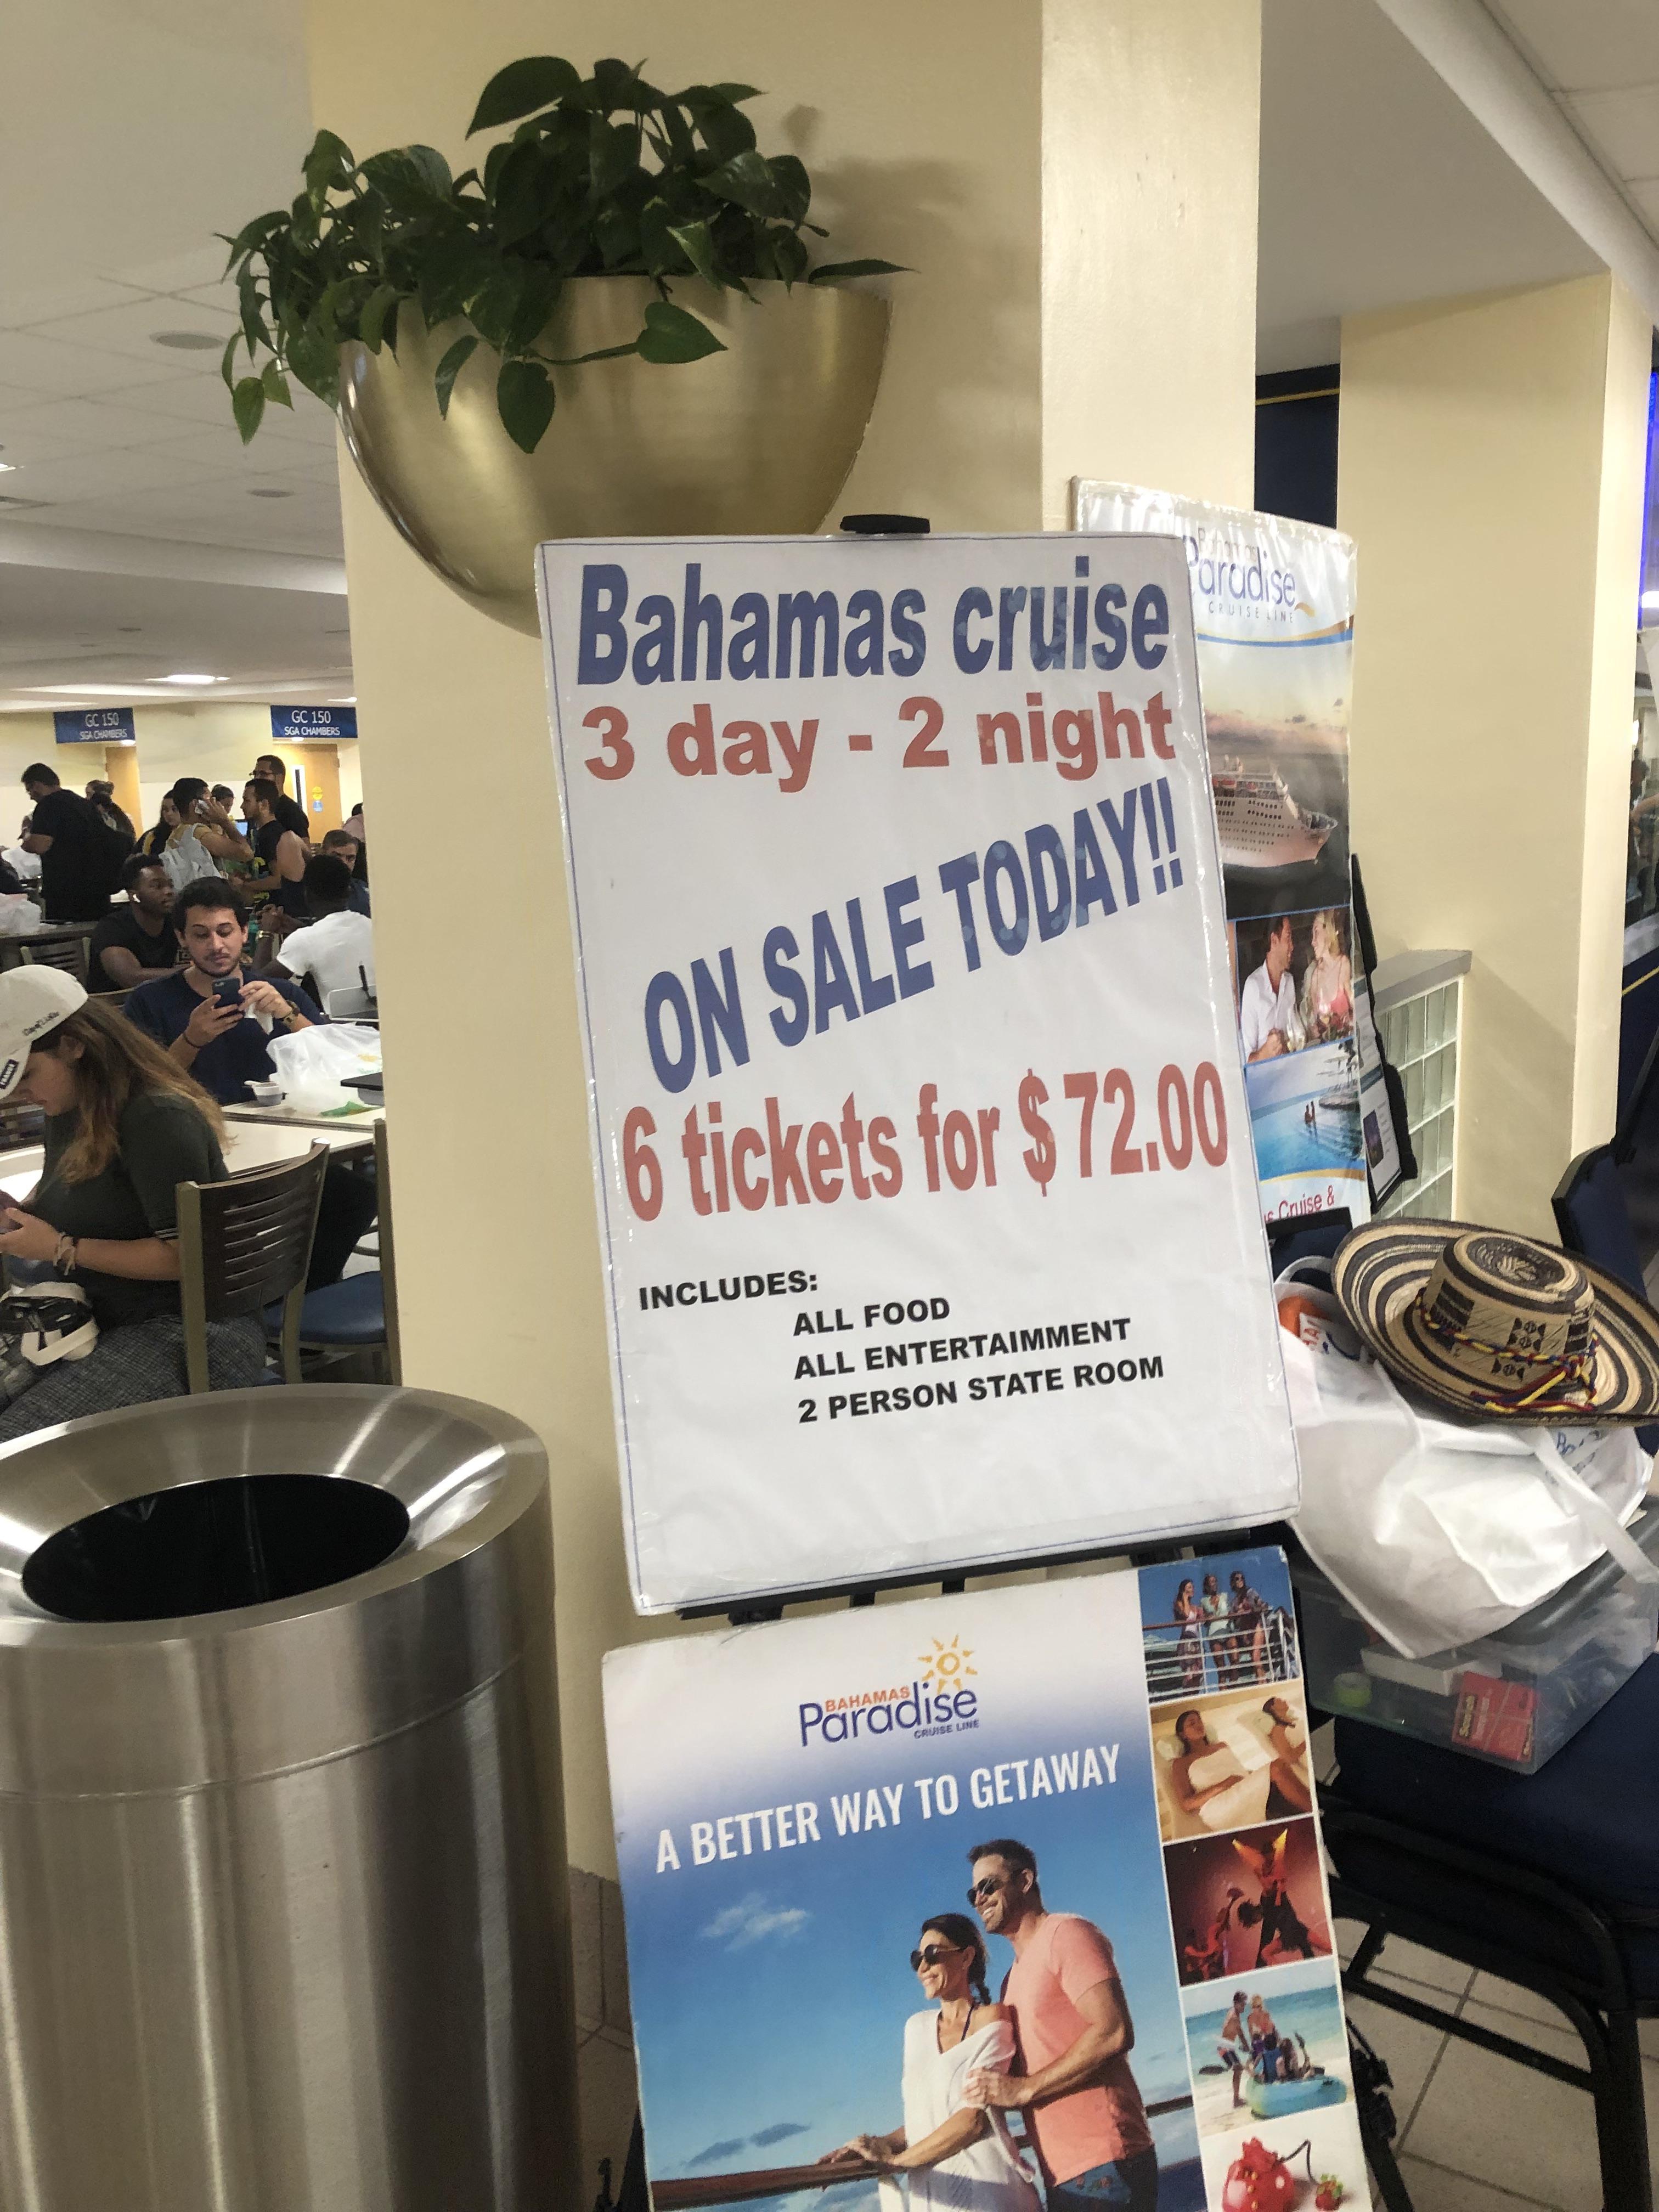 Bahamas cruise 3 day 2 night On Sale Today! 6 tickets for $72.00 Includes All Food All Entertainment 2 Person State Room Paradise A Better Way To Getaway